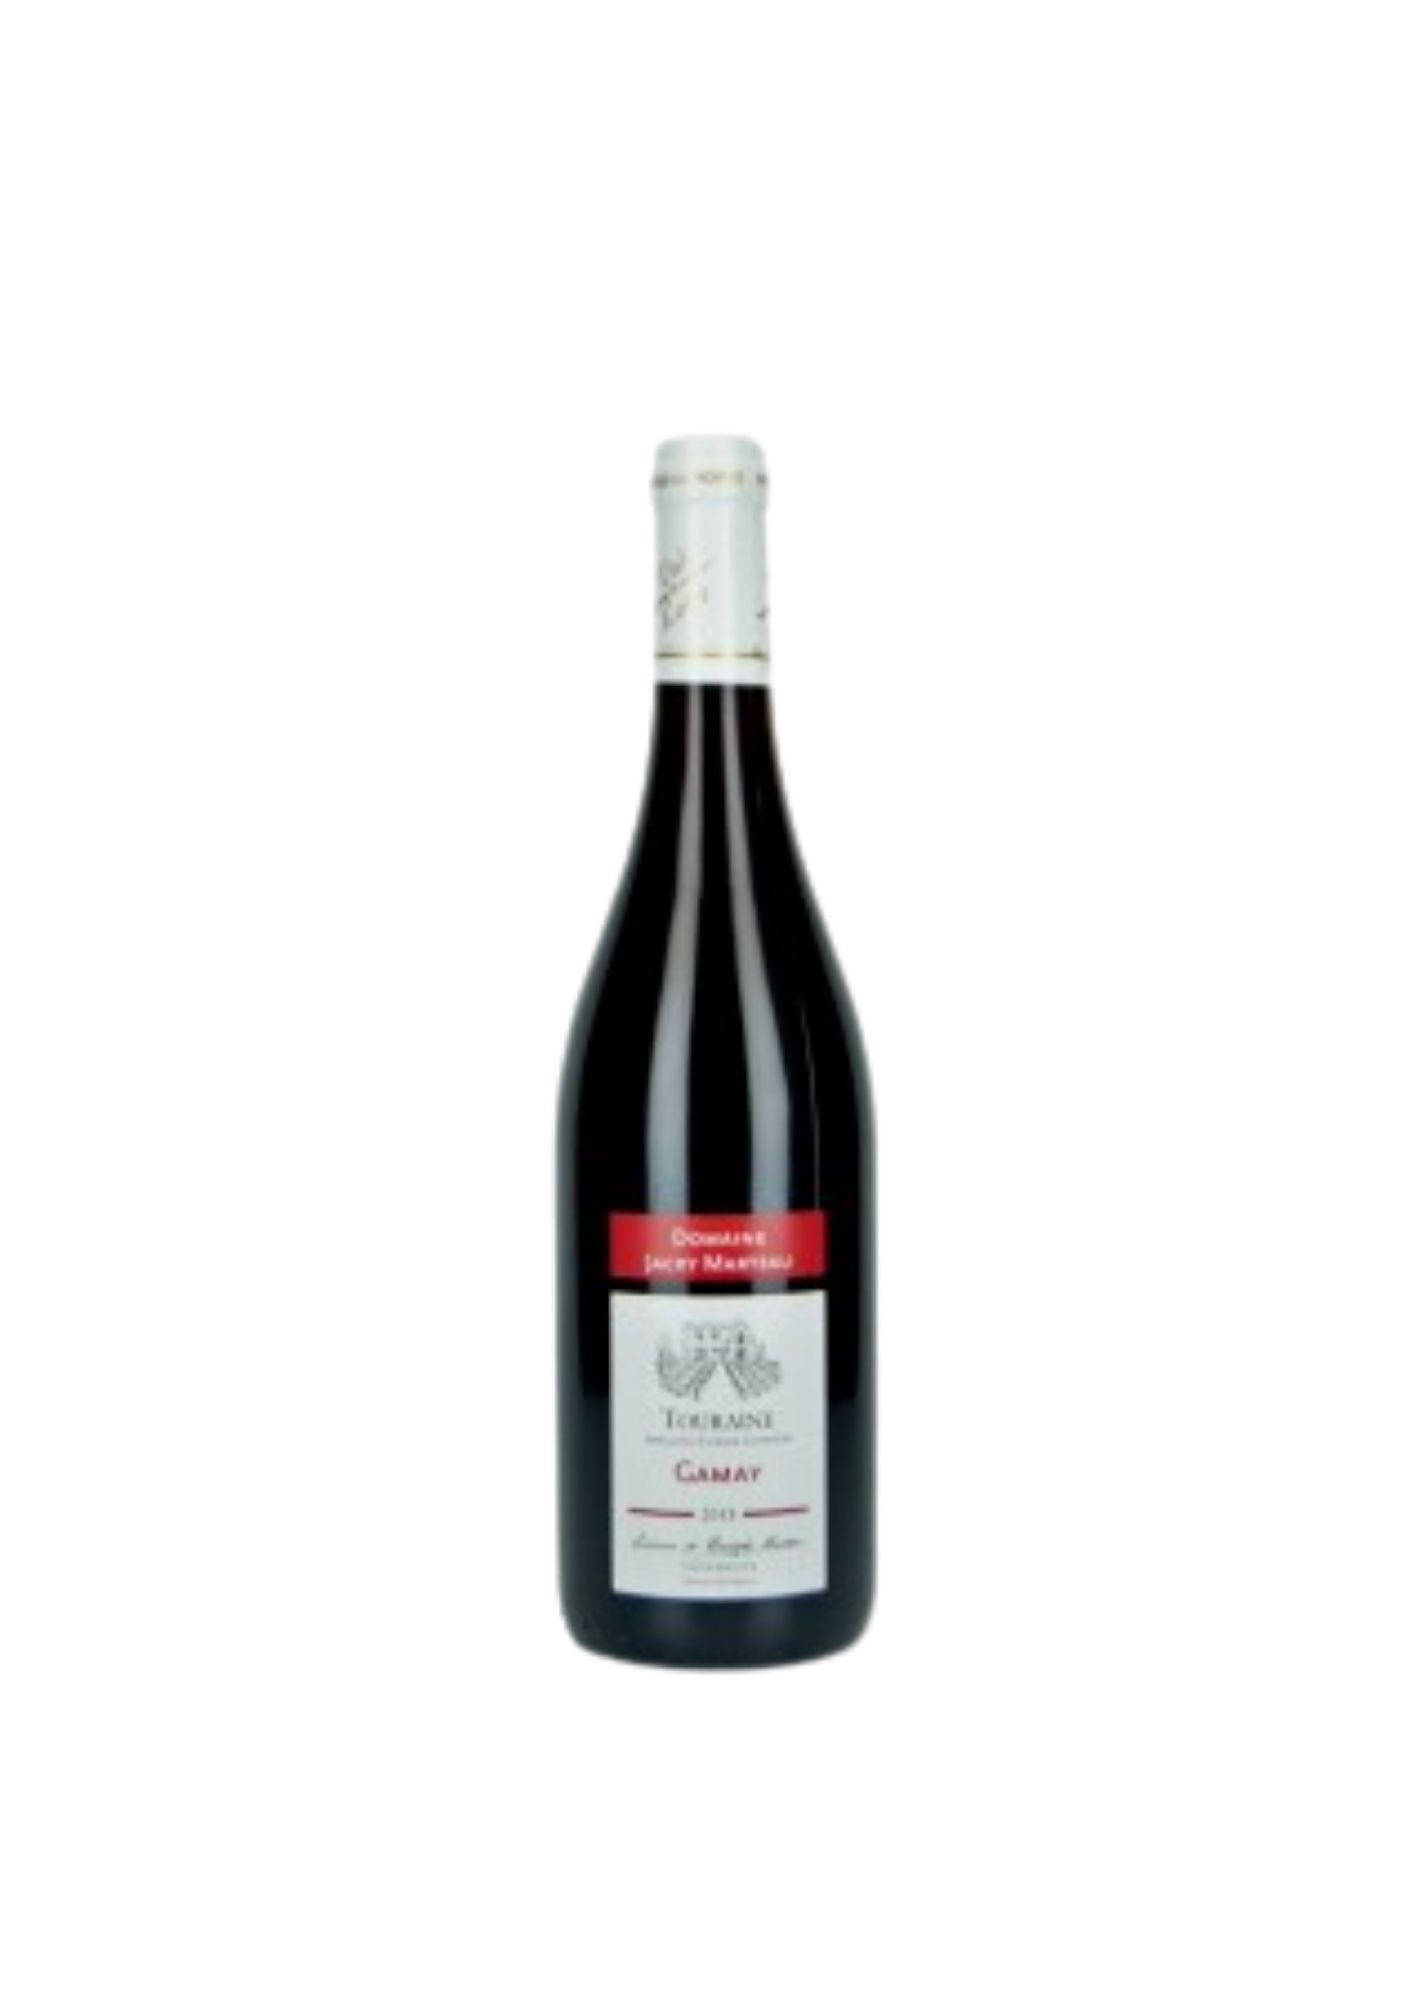 TOURAINE MARTEAU ROUGE GAMAY